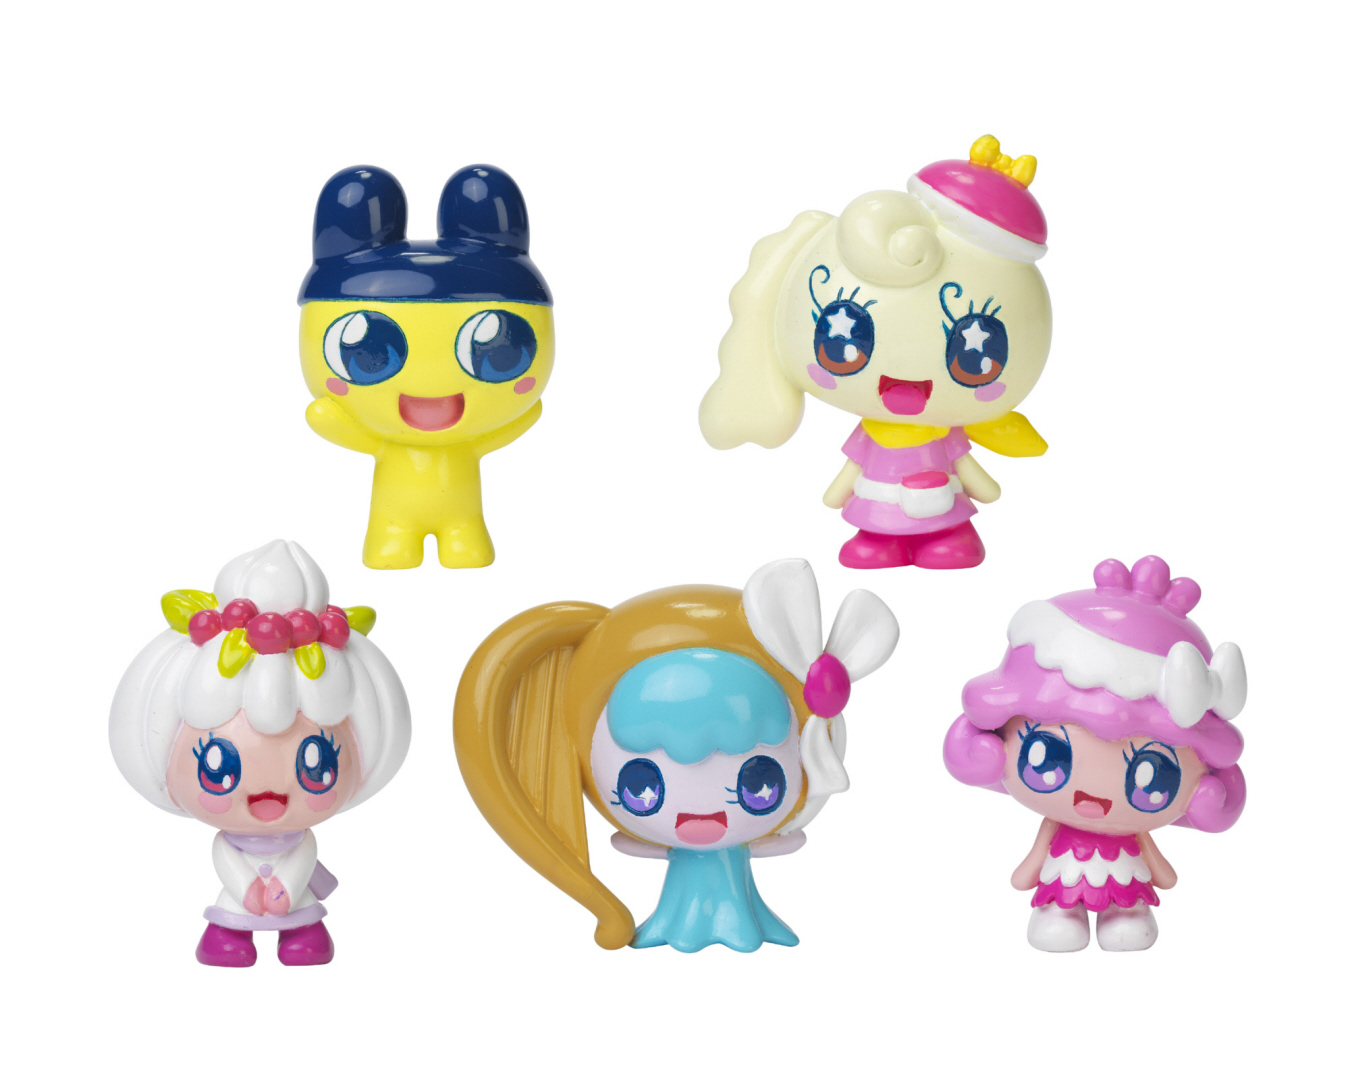 Tamagotchi Friends Collectible Figurines from Bandai at Toys 'R' Us stores now!